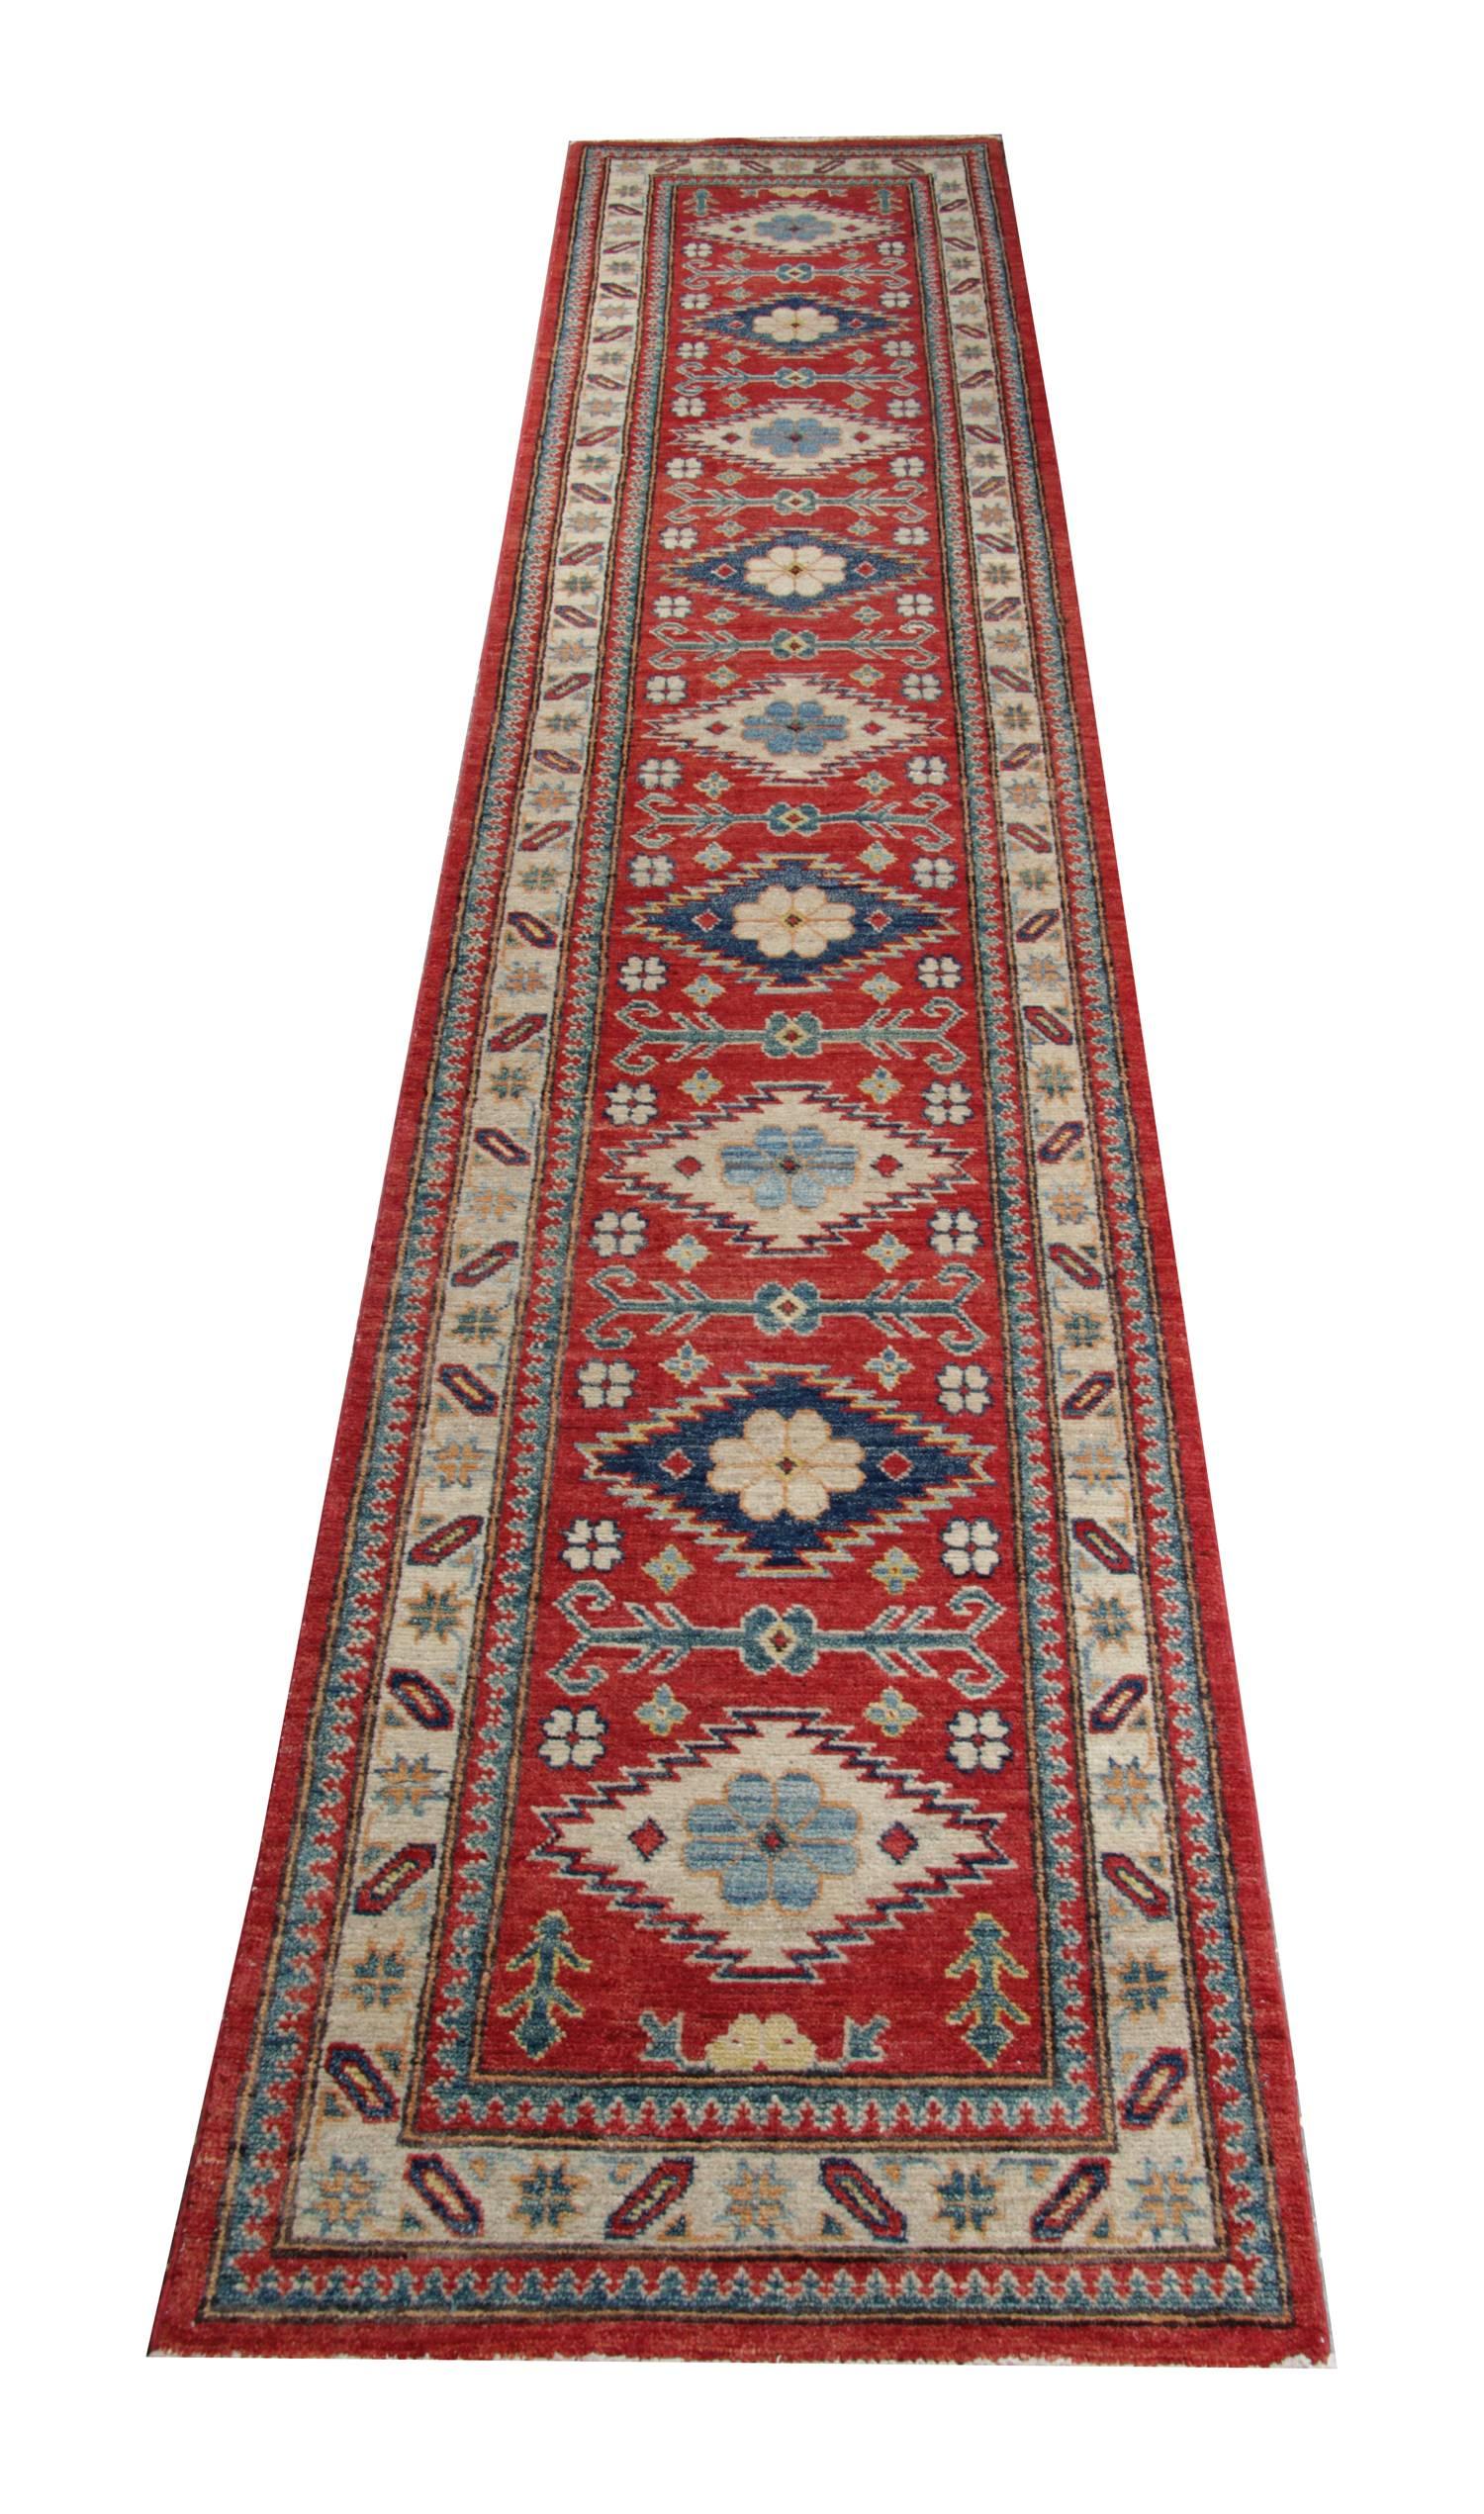 These handwoven new traditional rugs come in a striking color combination of the bright red rug style, navy, light blue, sea blue, cream and caramel. These new traditional handwoven runner rugs come from rug world in a striking color combination of